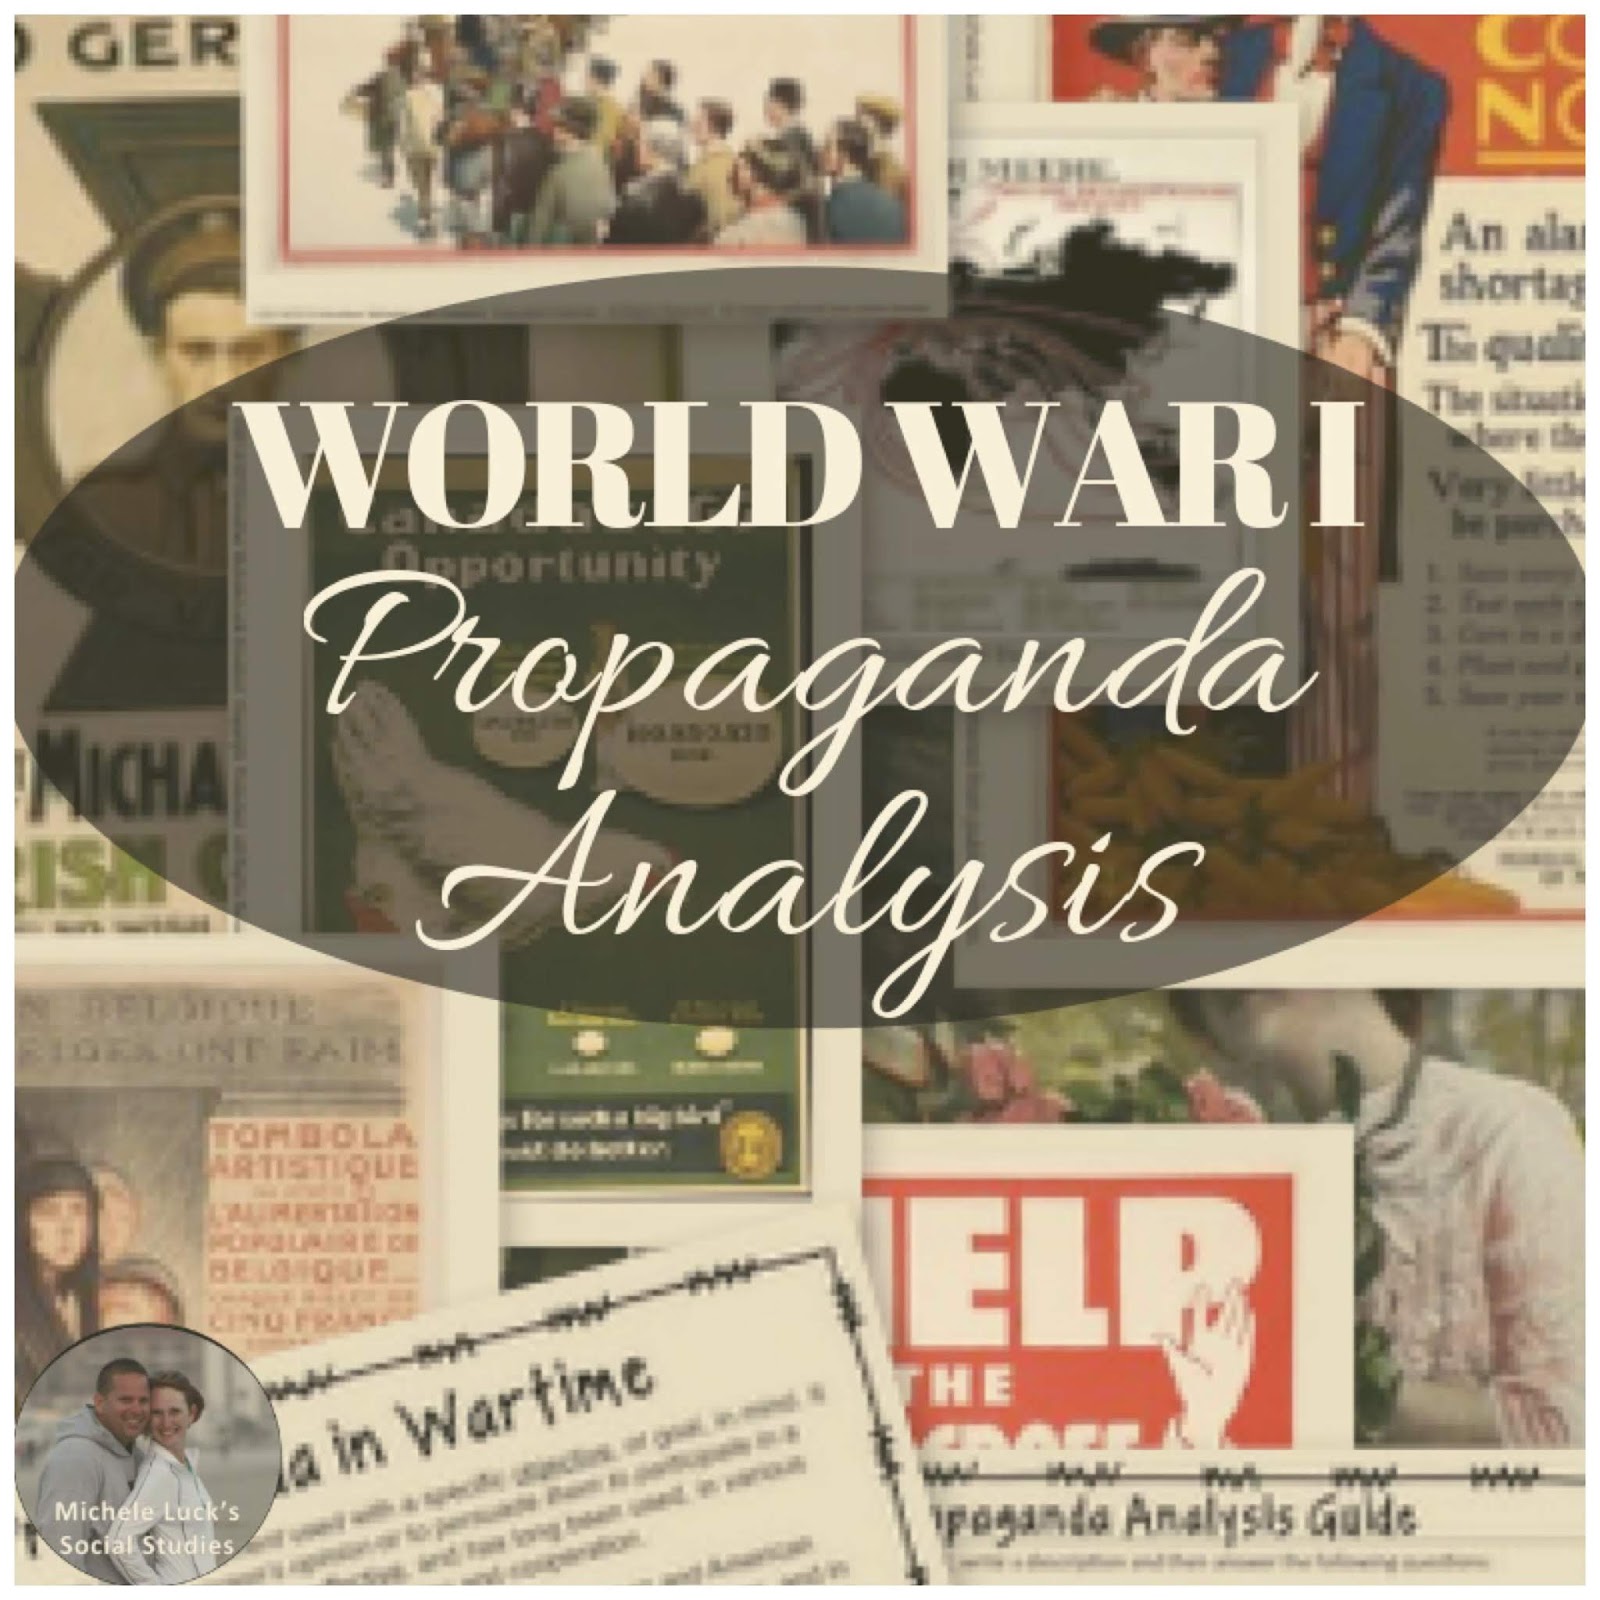 High school teachers, Dissect WWI Propaganda in your classroom by studying and analyzing propaganda of wartime, using inquiry tools and encouraging deeper analysis. #highschoolteachers #teachinginquiry #criticalthinking #primarysourceanalysis